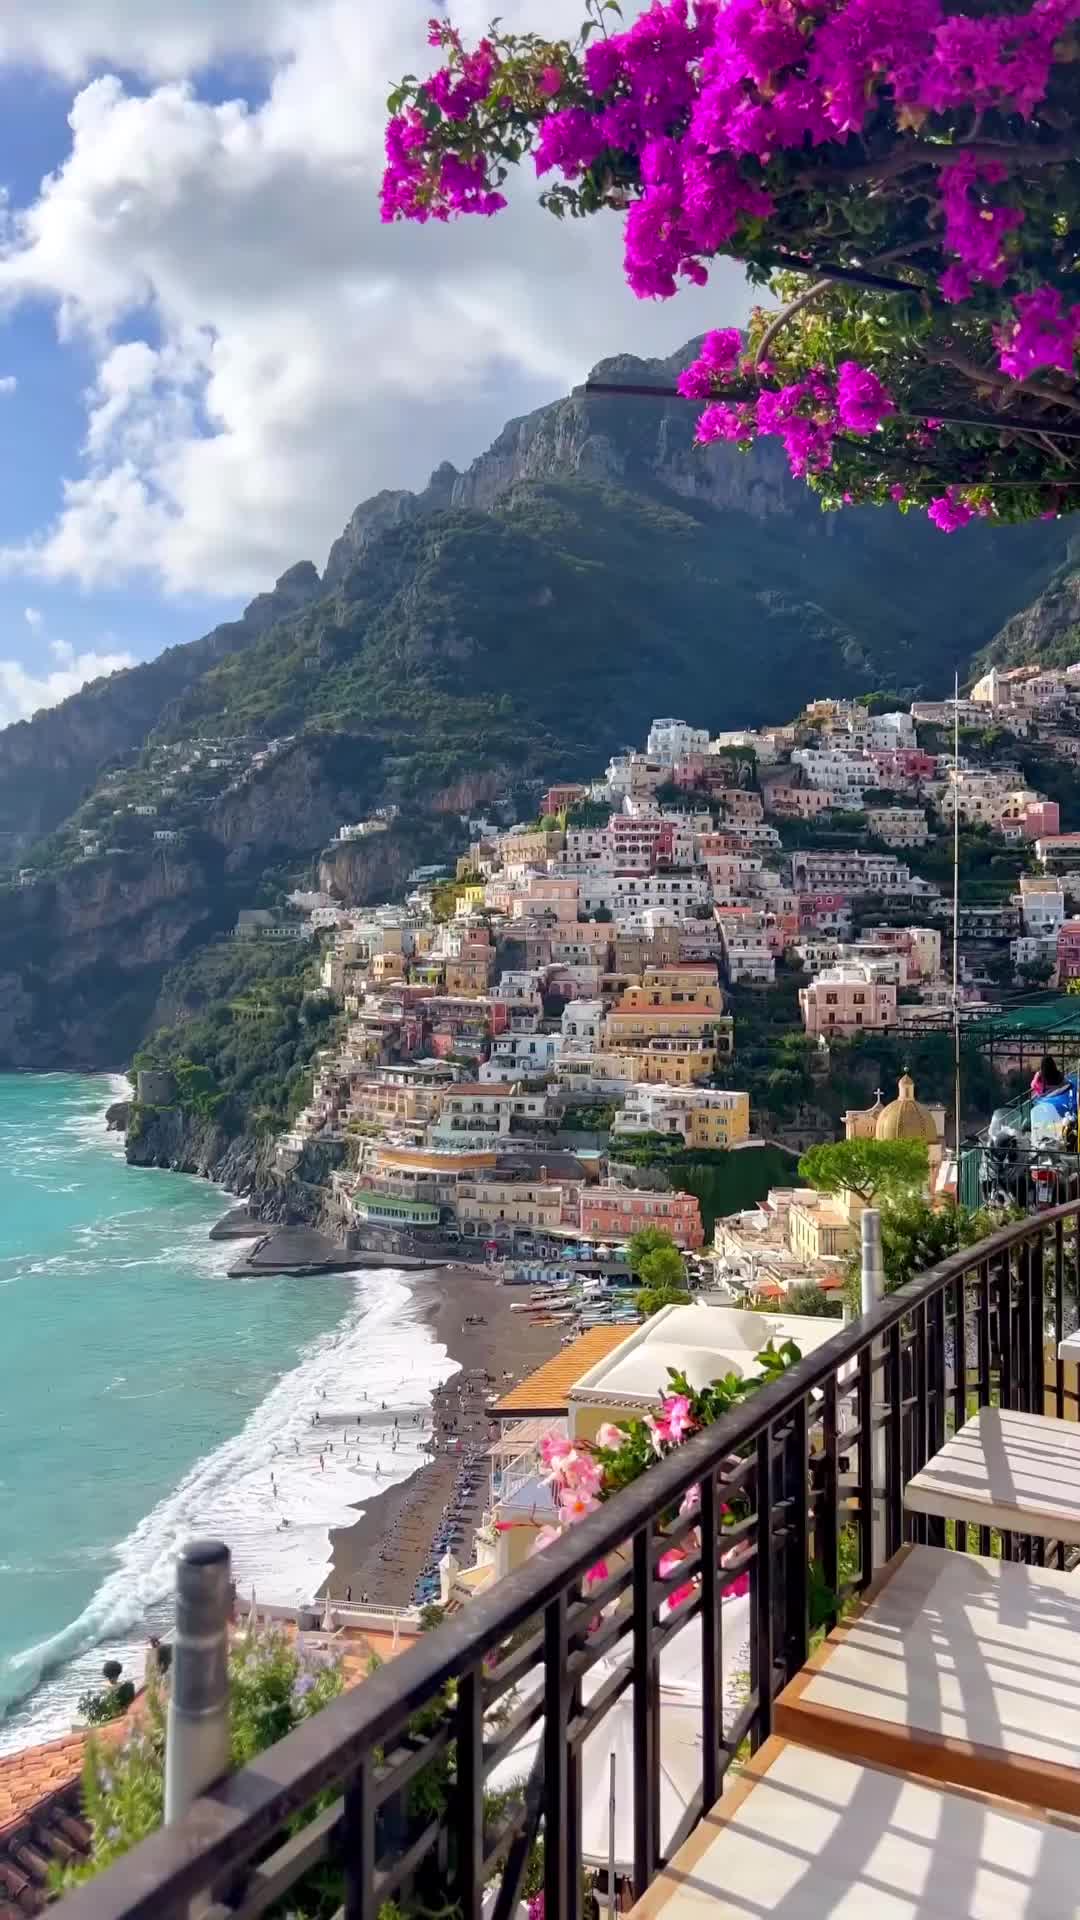 Fall in Love with the Streets of Positano😍🧡